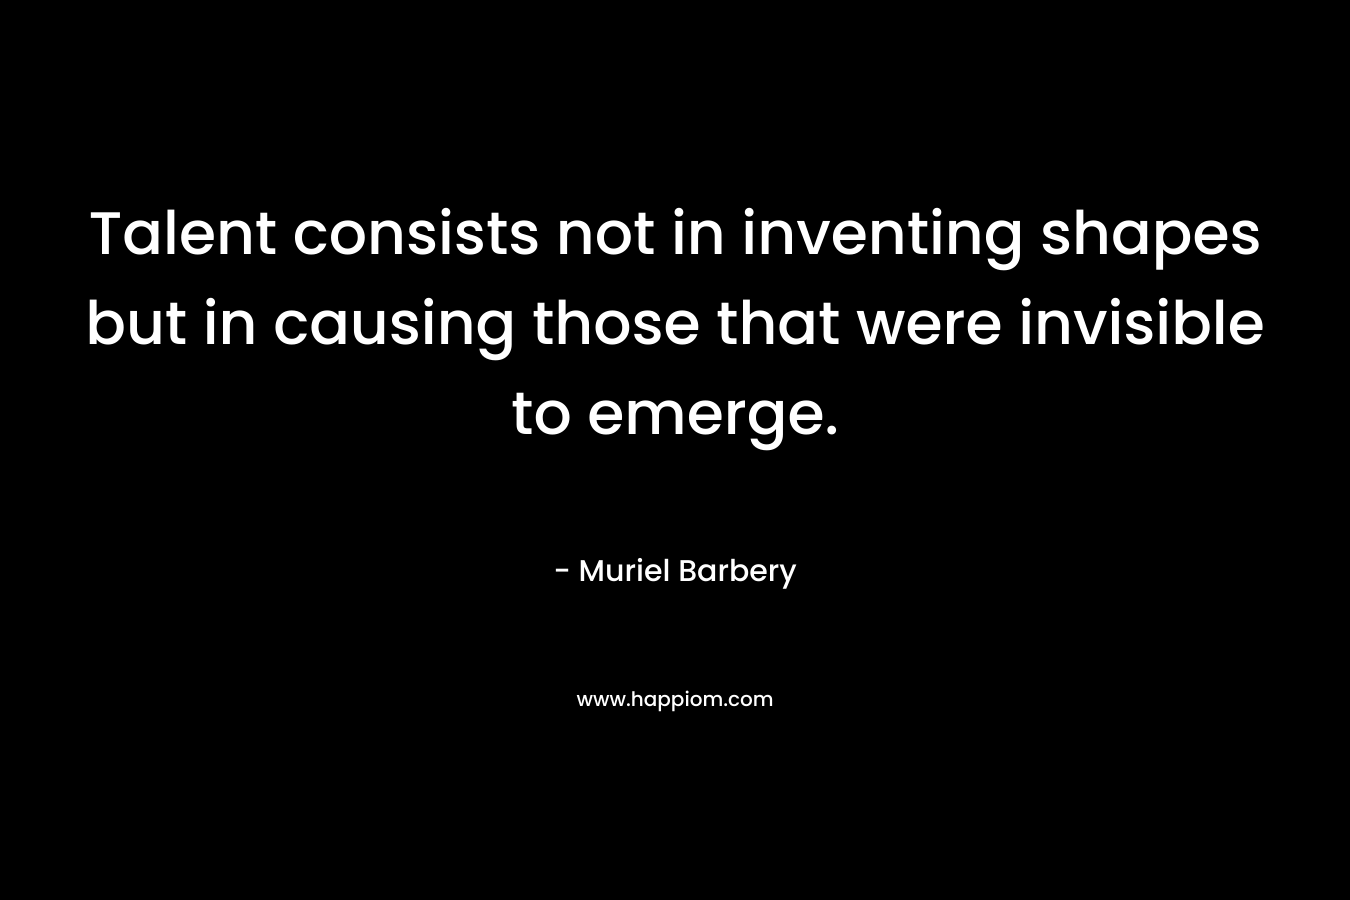 Talent consists not in inventing shapes but in causing those that were invisible to emerge.